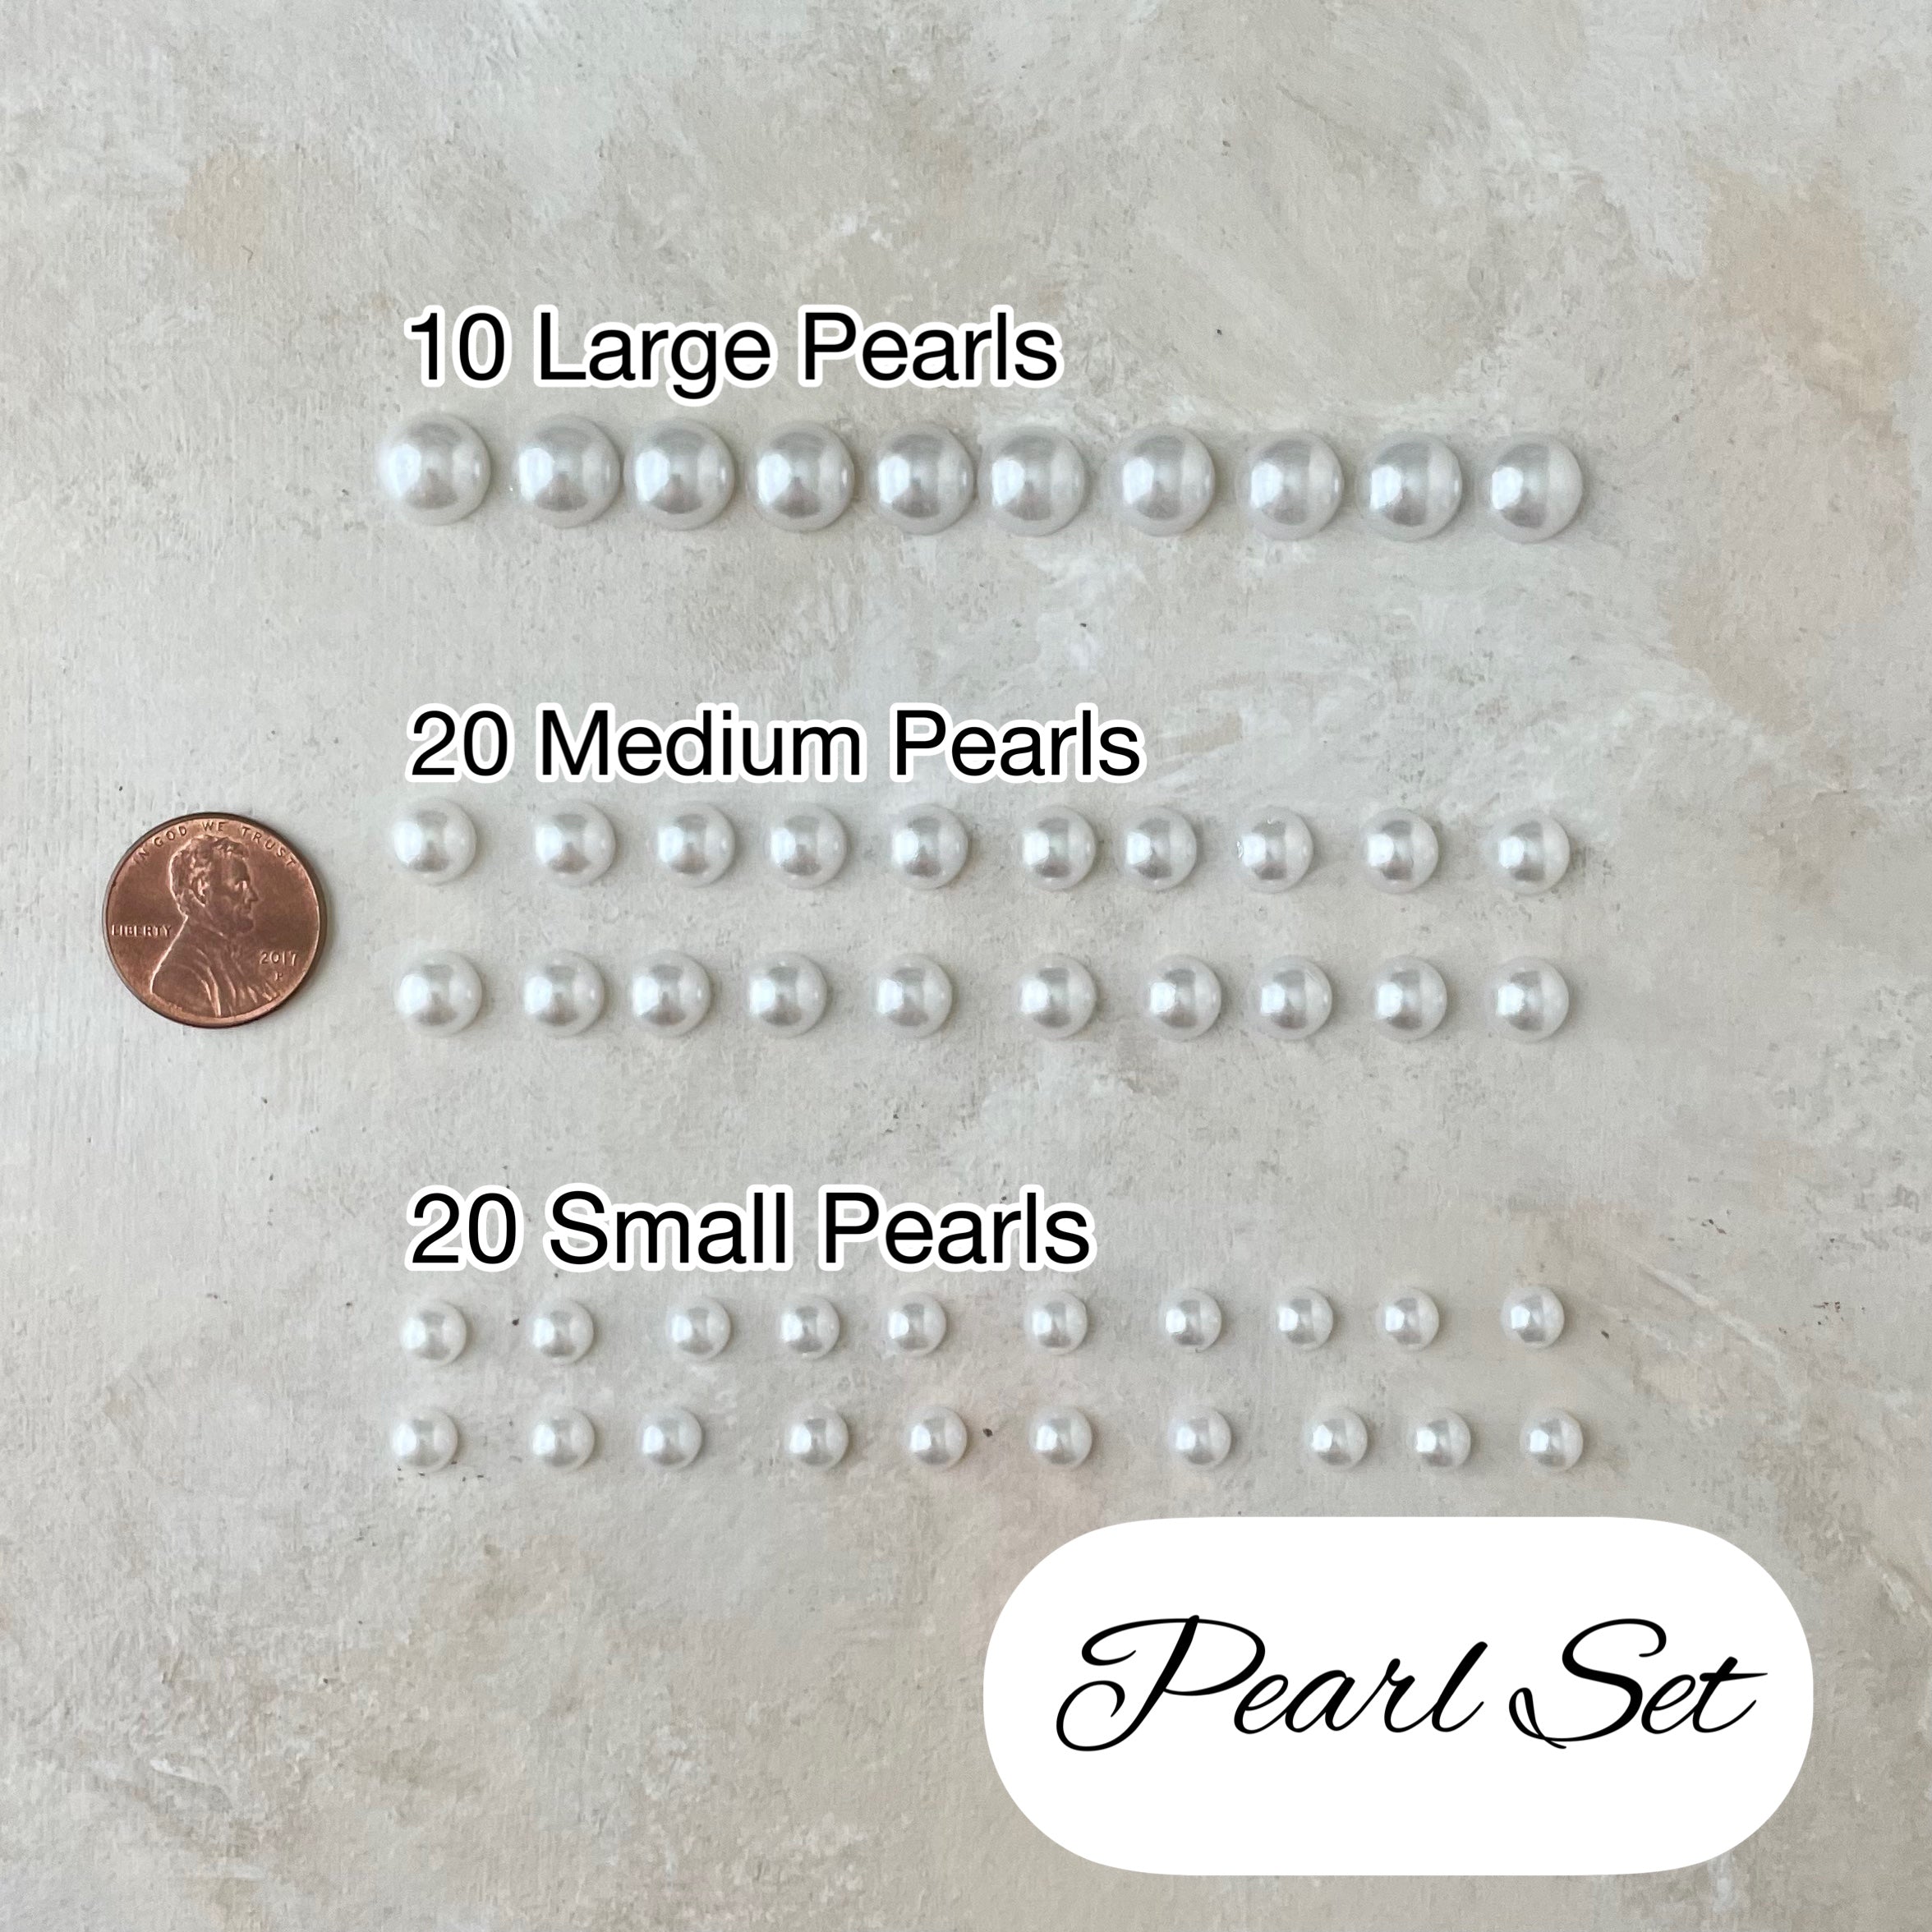 Pearls for Flat Lays